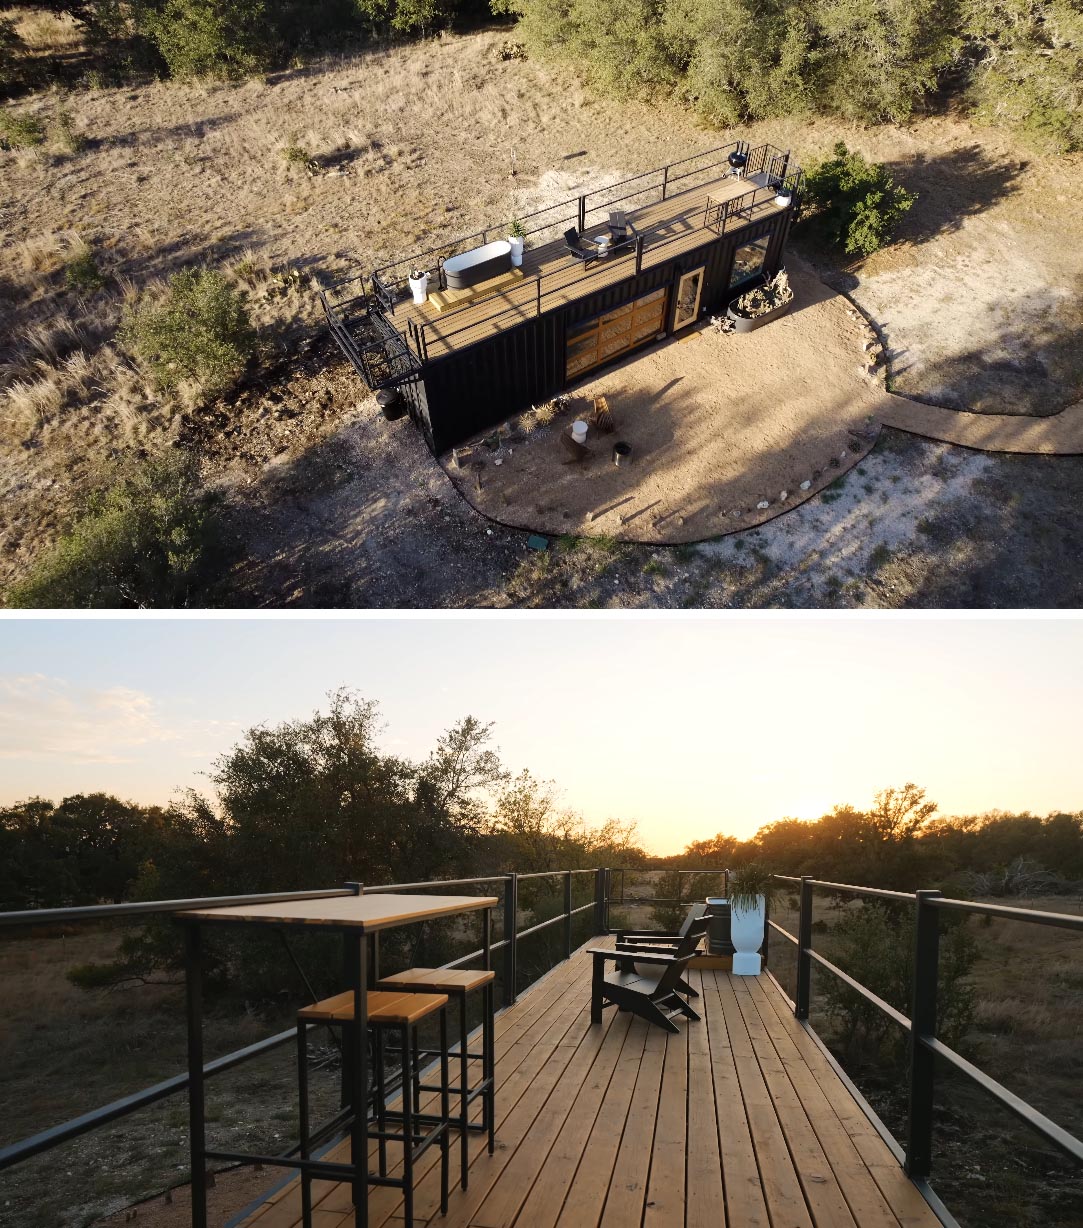 A tiny home made from a shipping container includes a rooftop deck with a dining area, lounge, outdoor bathtub, and a net hammock that hangs out from the edge of the home.